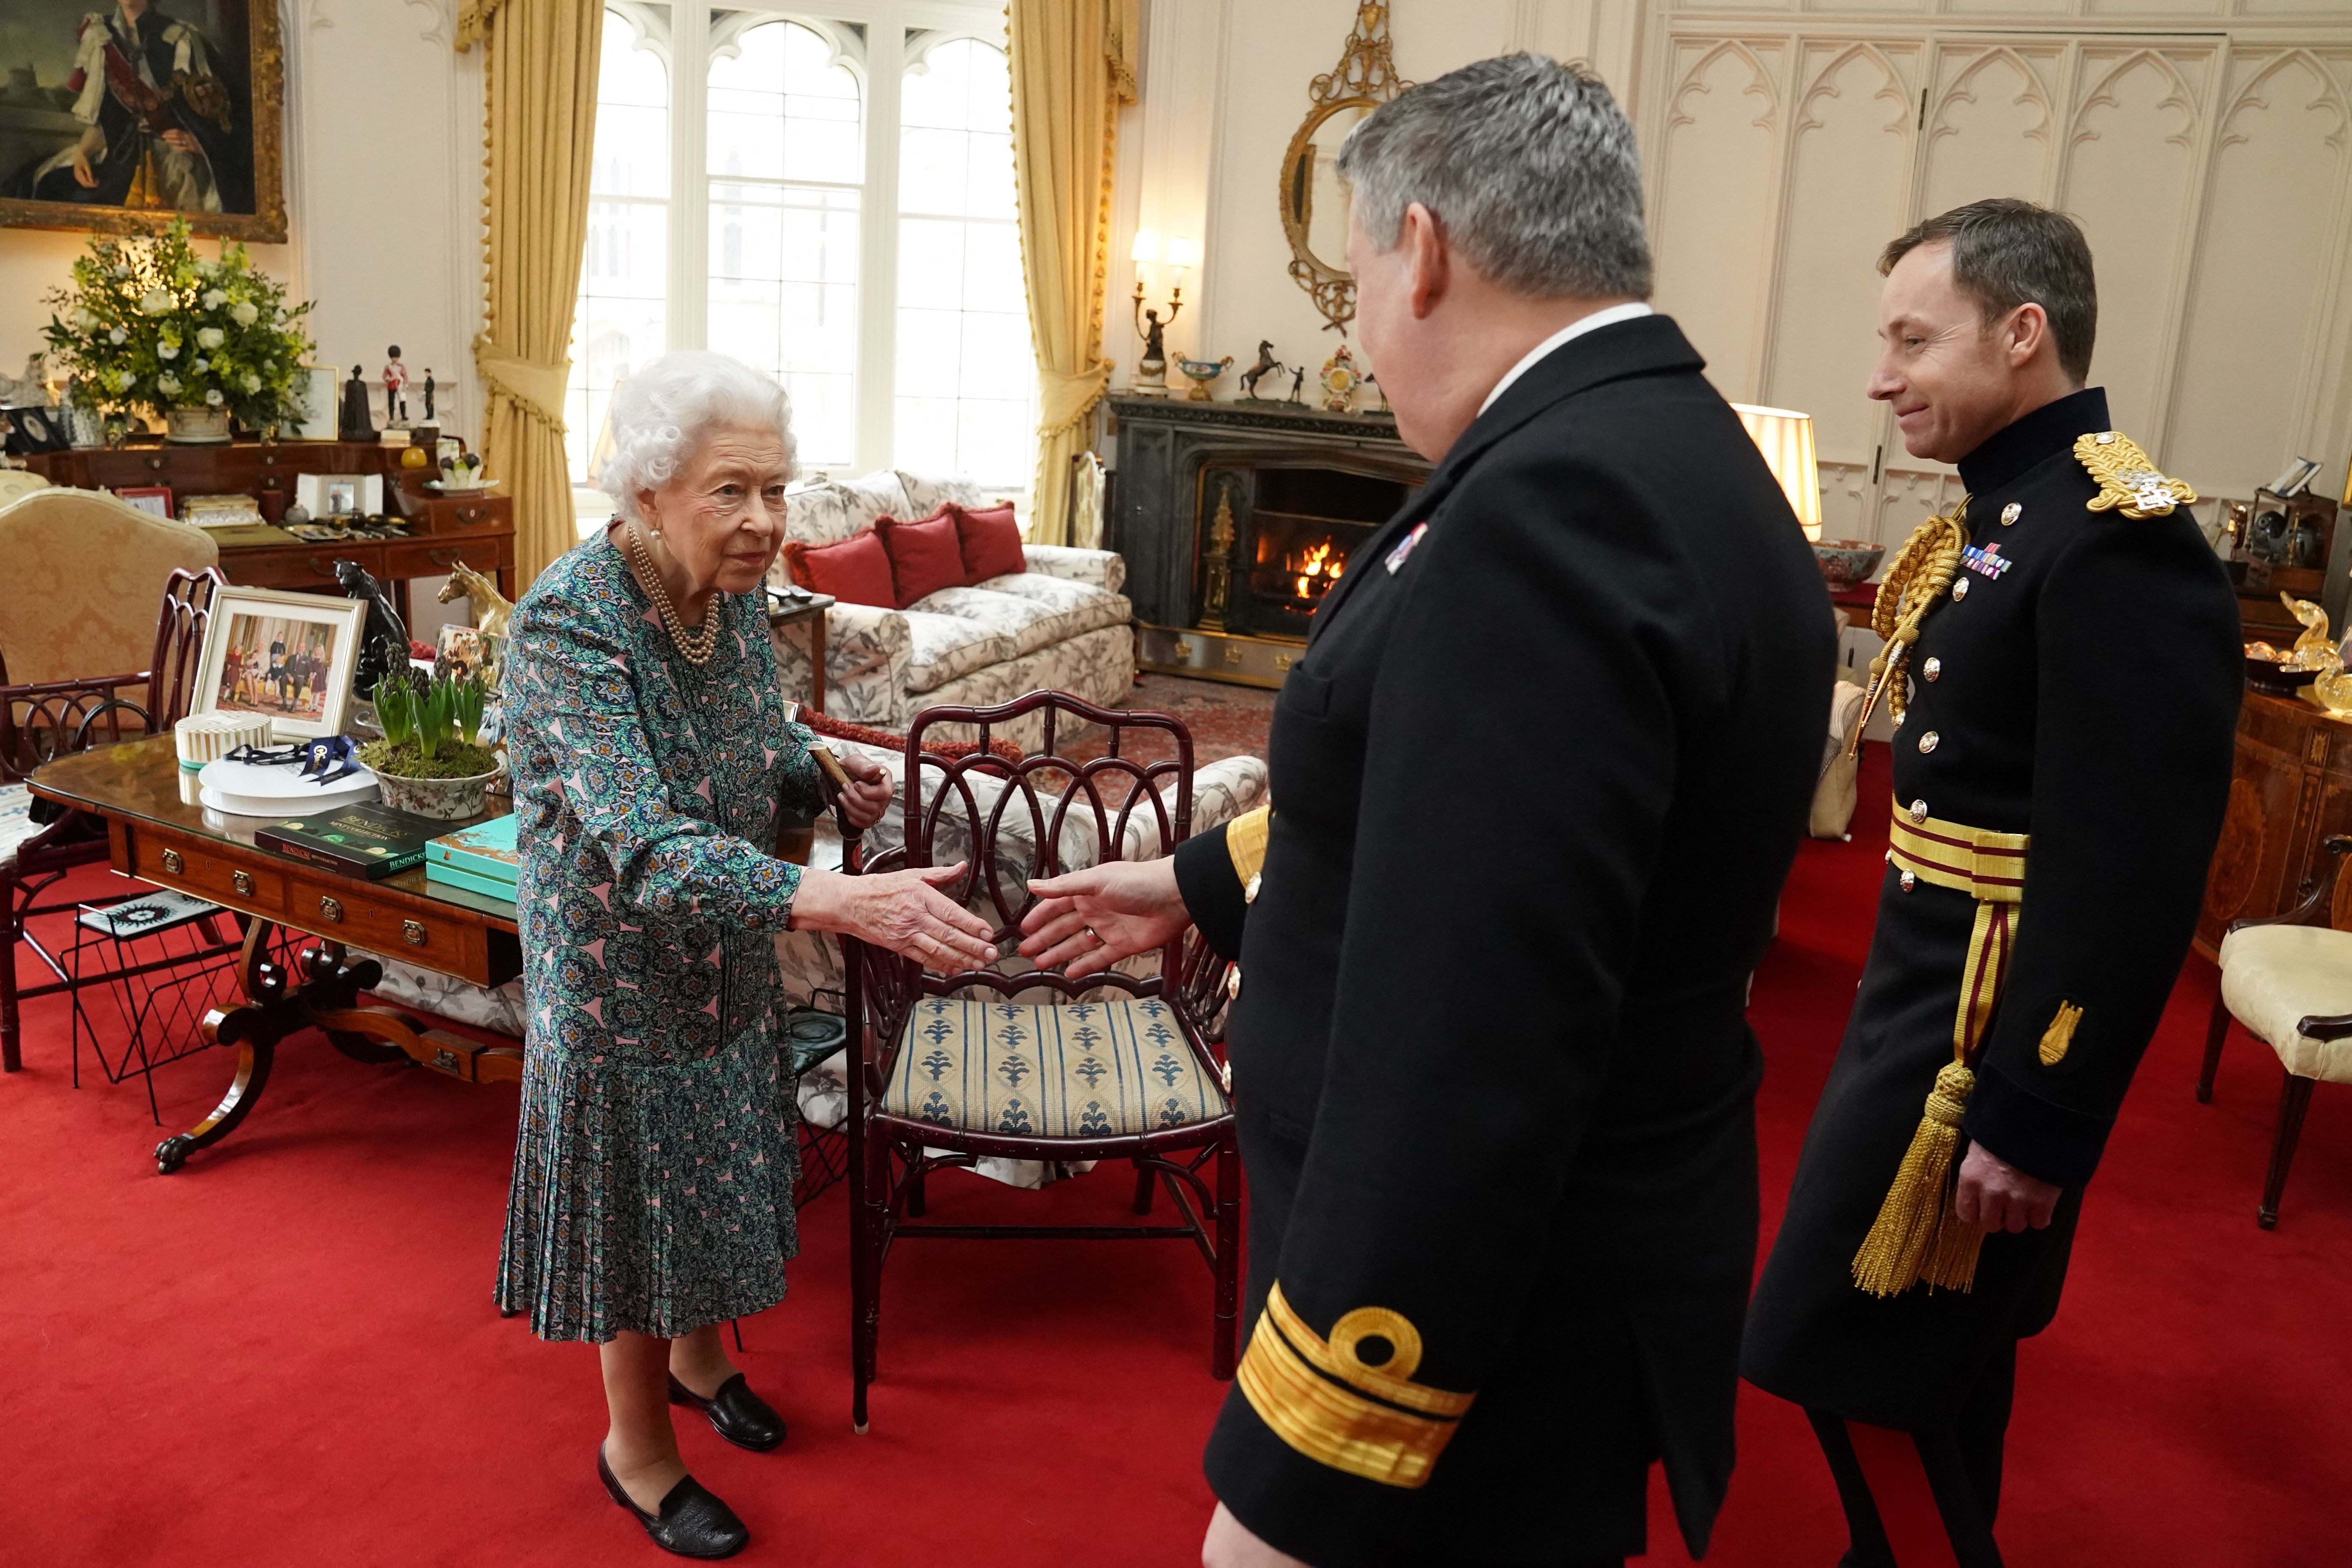 Queen Elizabeth II welcomed outgoing Defence Service Secretaries Rear Admiral James Macleod and incoming Defence Service Secretaries Major General Eldon Millar at the Windsor Castle, in Windsor, on February 16, 2022. | Source: Getty Images